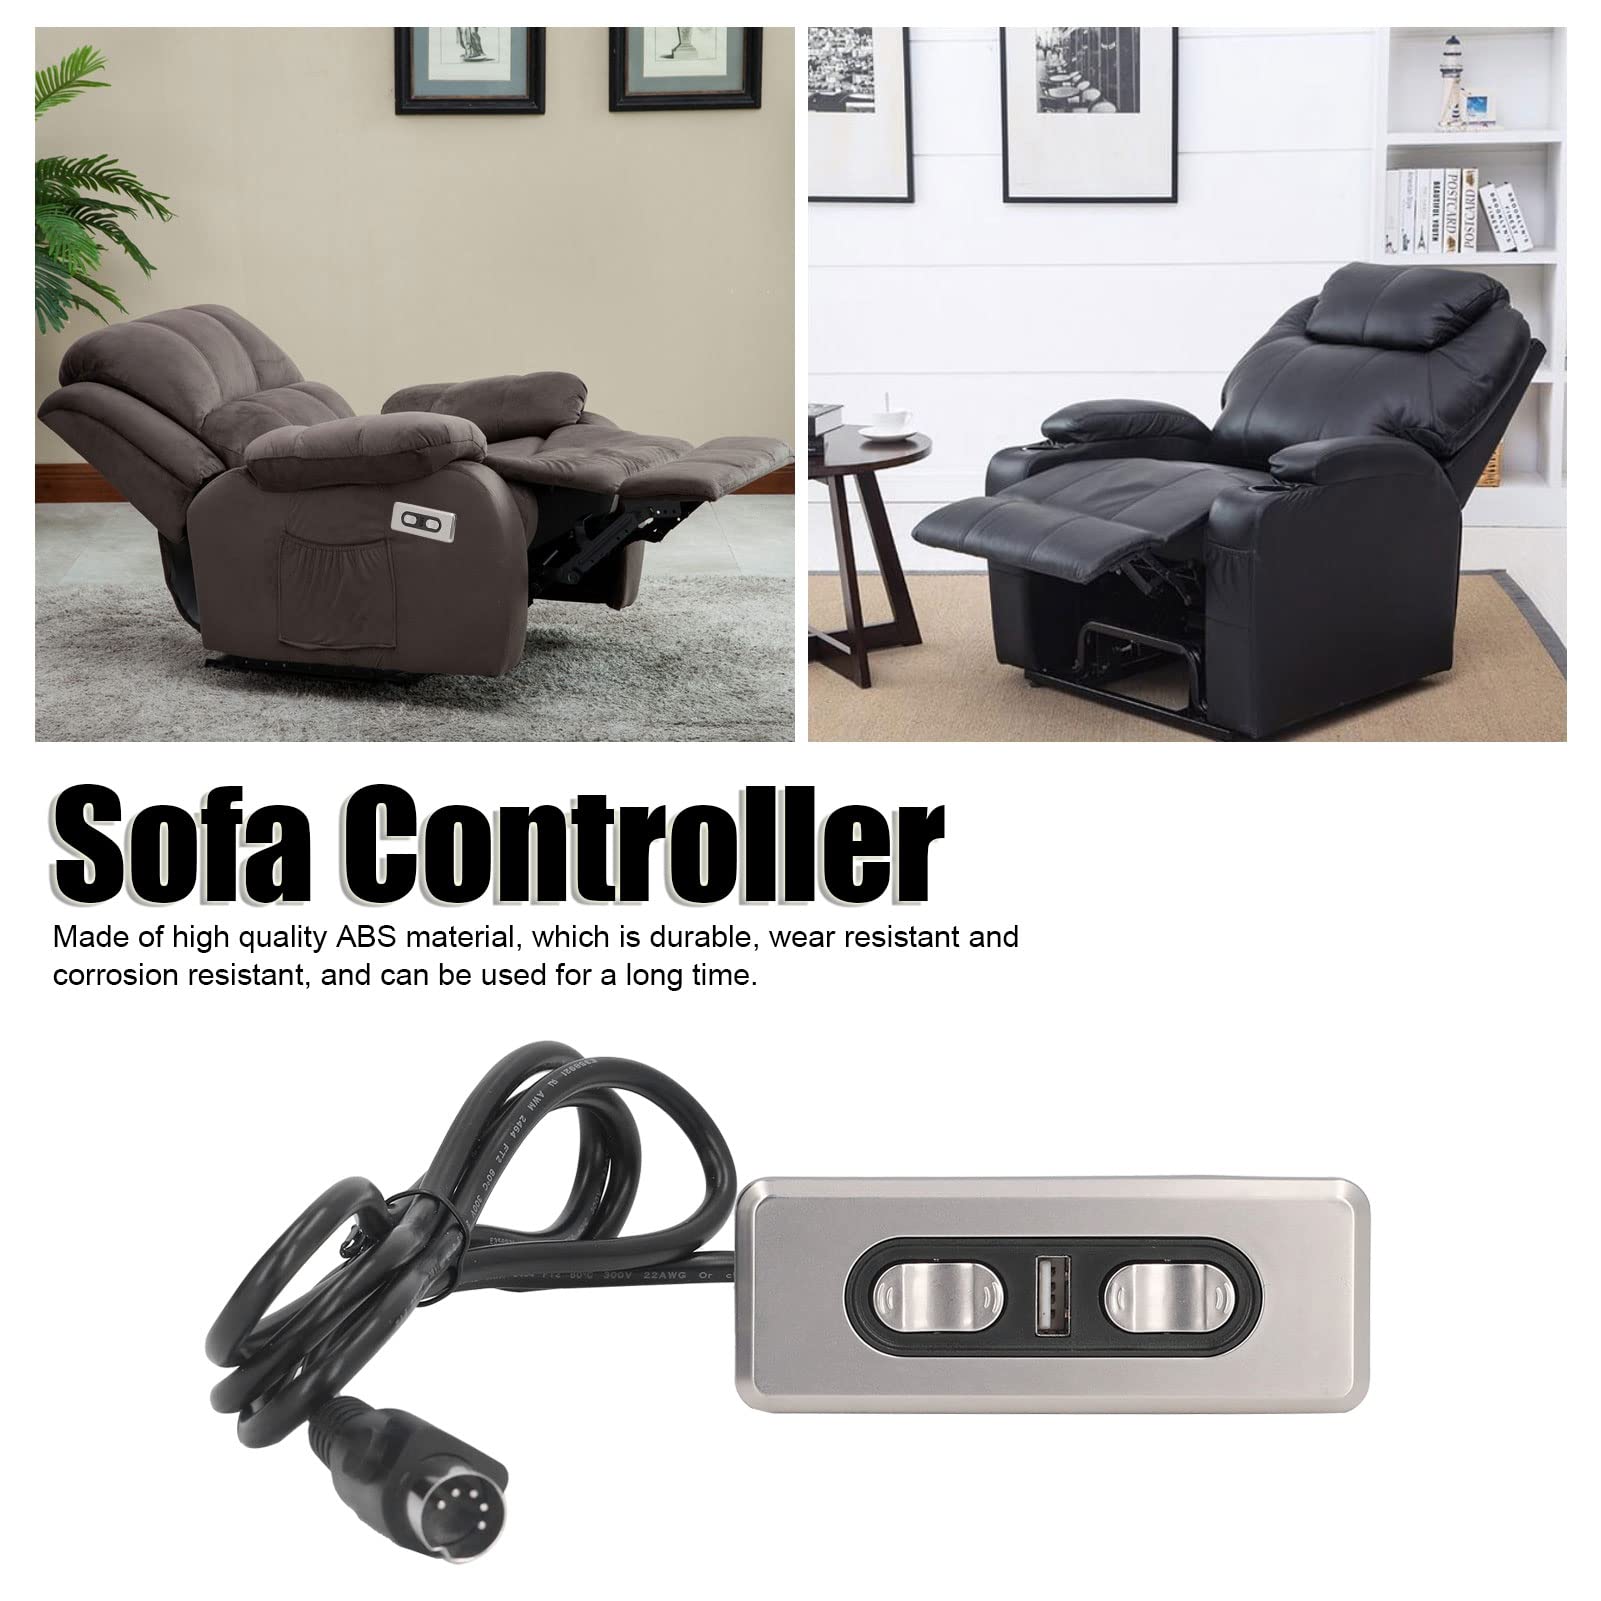 AYNEFY Electric Sofa Controller, Dual Motor Electric Sofa Controller Recliner Lift Controller with USB Charging Port Button Pin Lift Chair or Power Recliner Hand Control